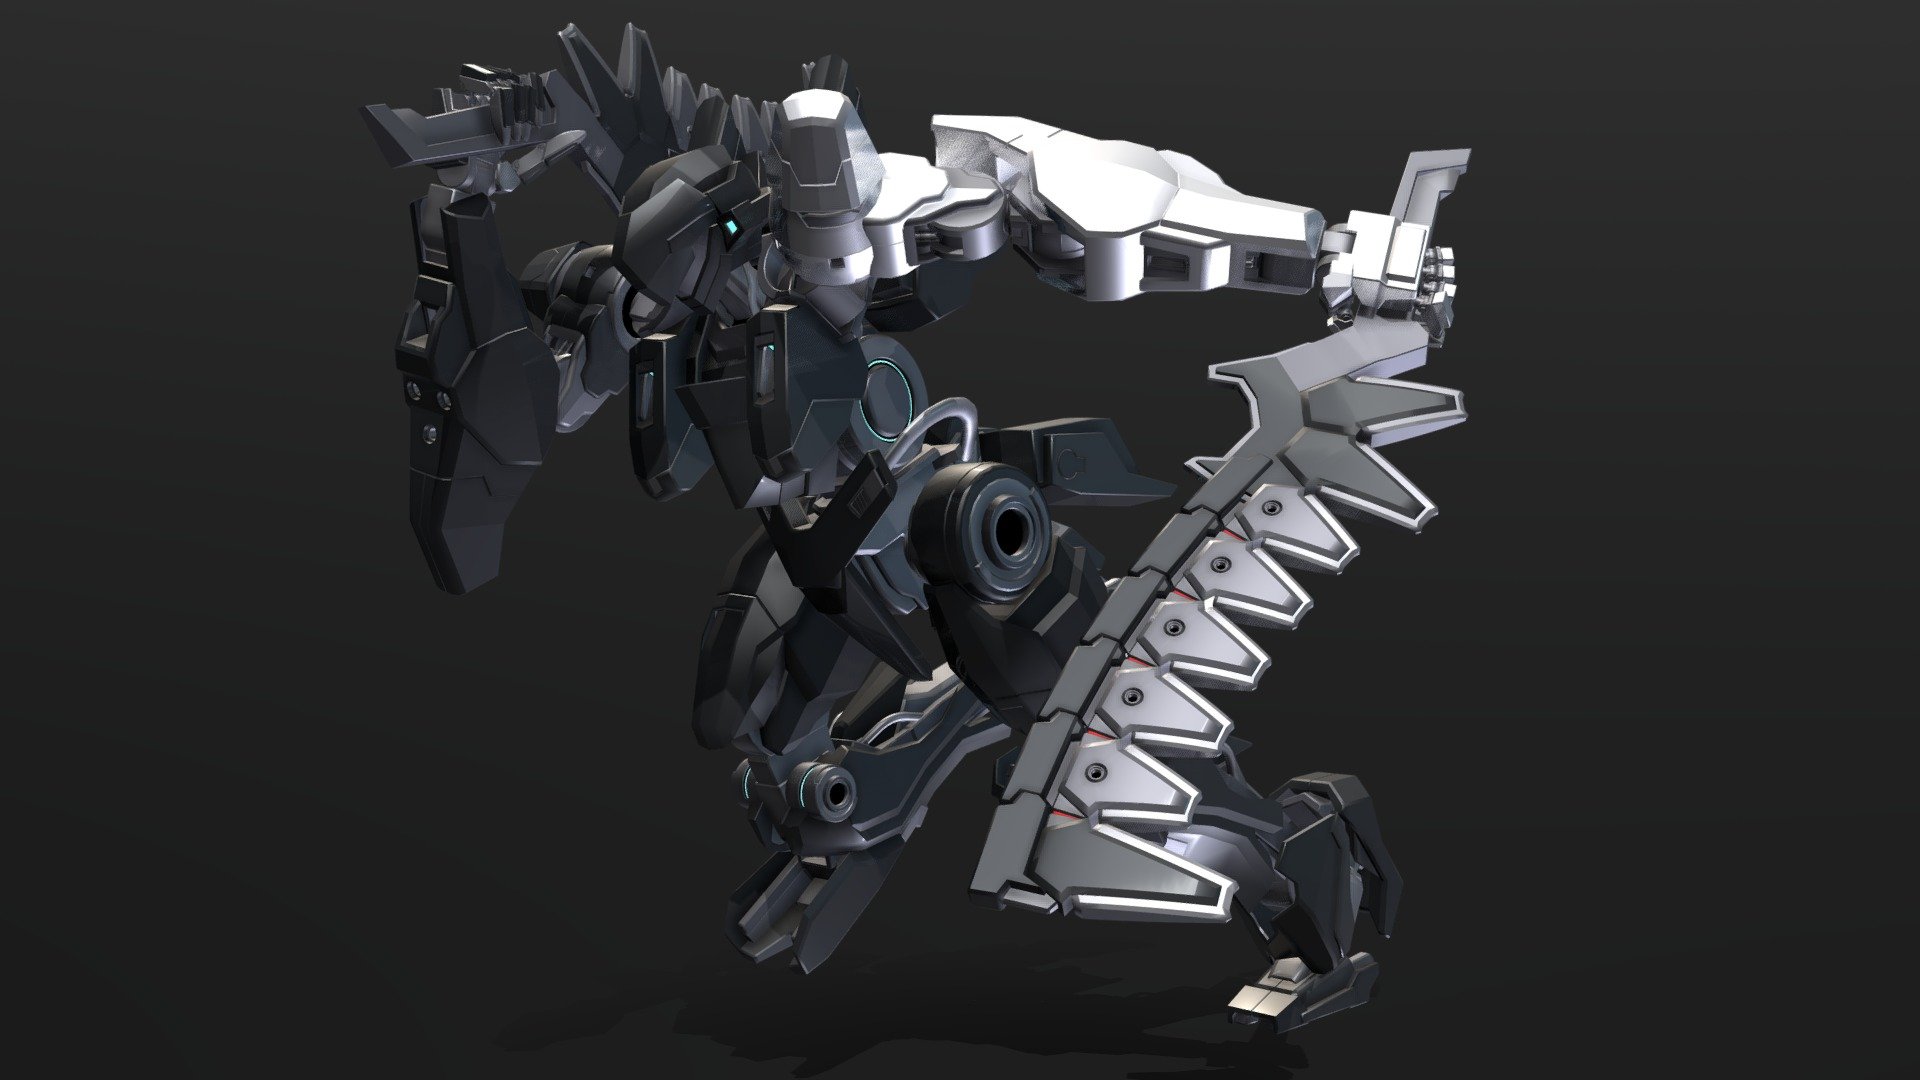 The Airgetlam with it's signature sword-type weapons, the Flexing Blades. These blades are held together by tightly wound ligaments. On contact, the blunt segments attempt to straighten out; the ligaments contract however and quickly return it to form, increasing the weapon's striking power as it pounds against an object. In the IBO universe, that'd make it a fairly intimidating weapon 3d model